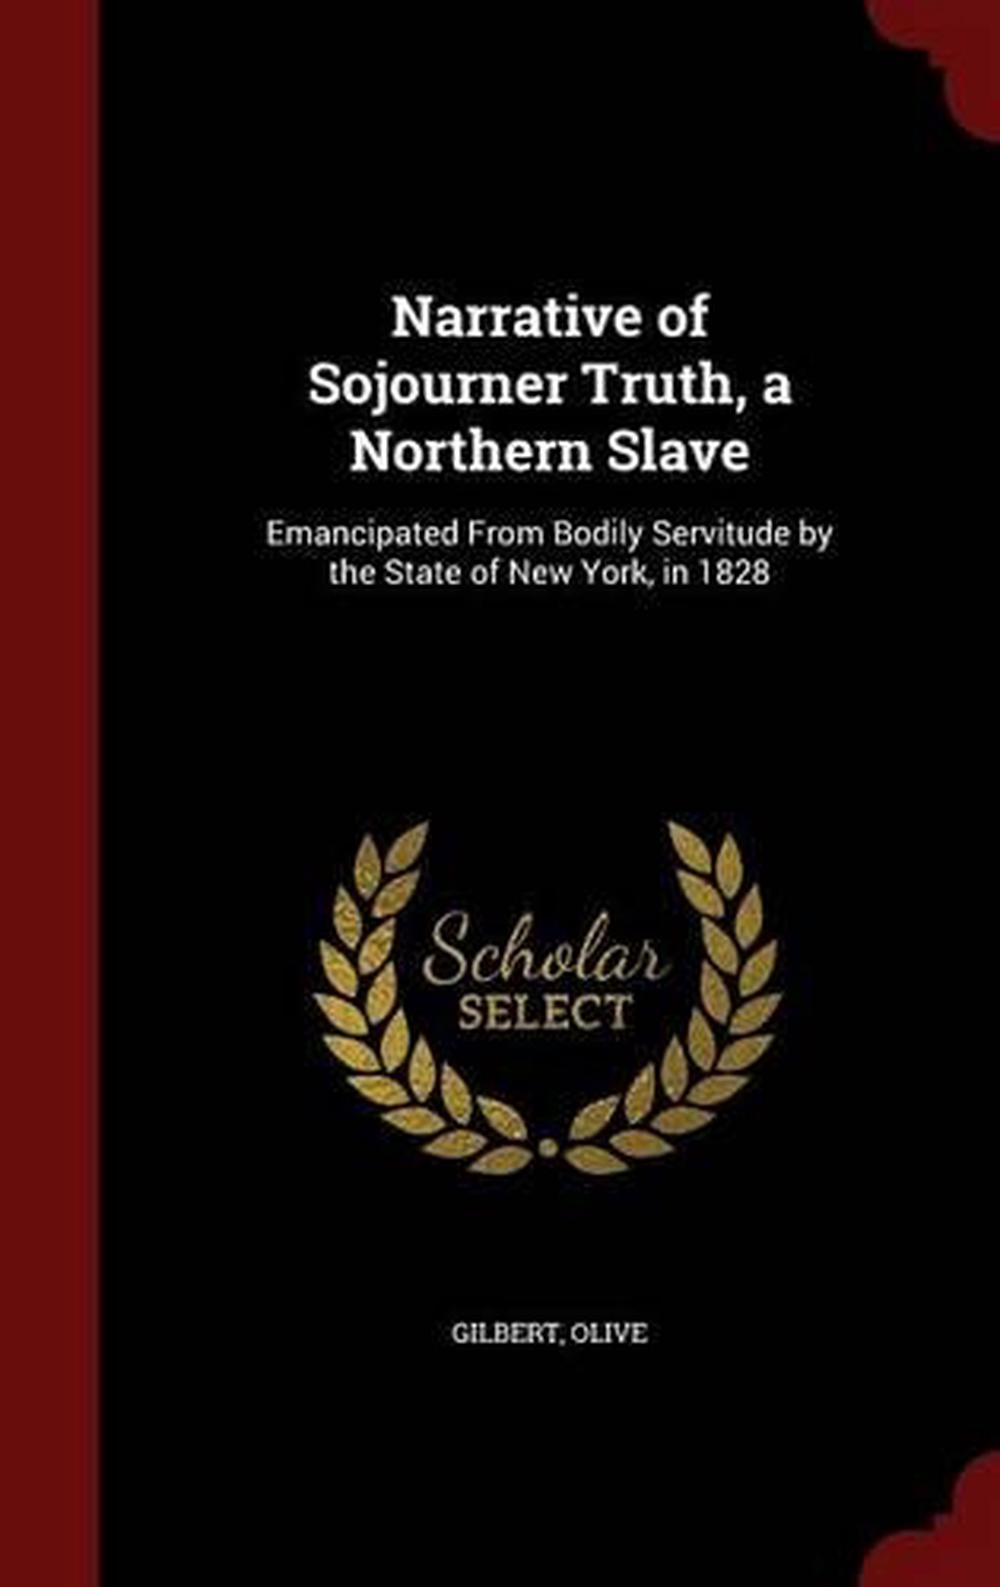 the narrative of sojourner truth a northern slave